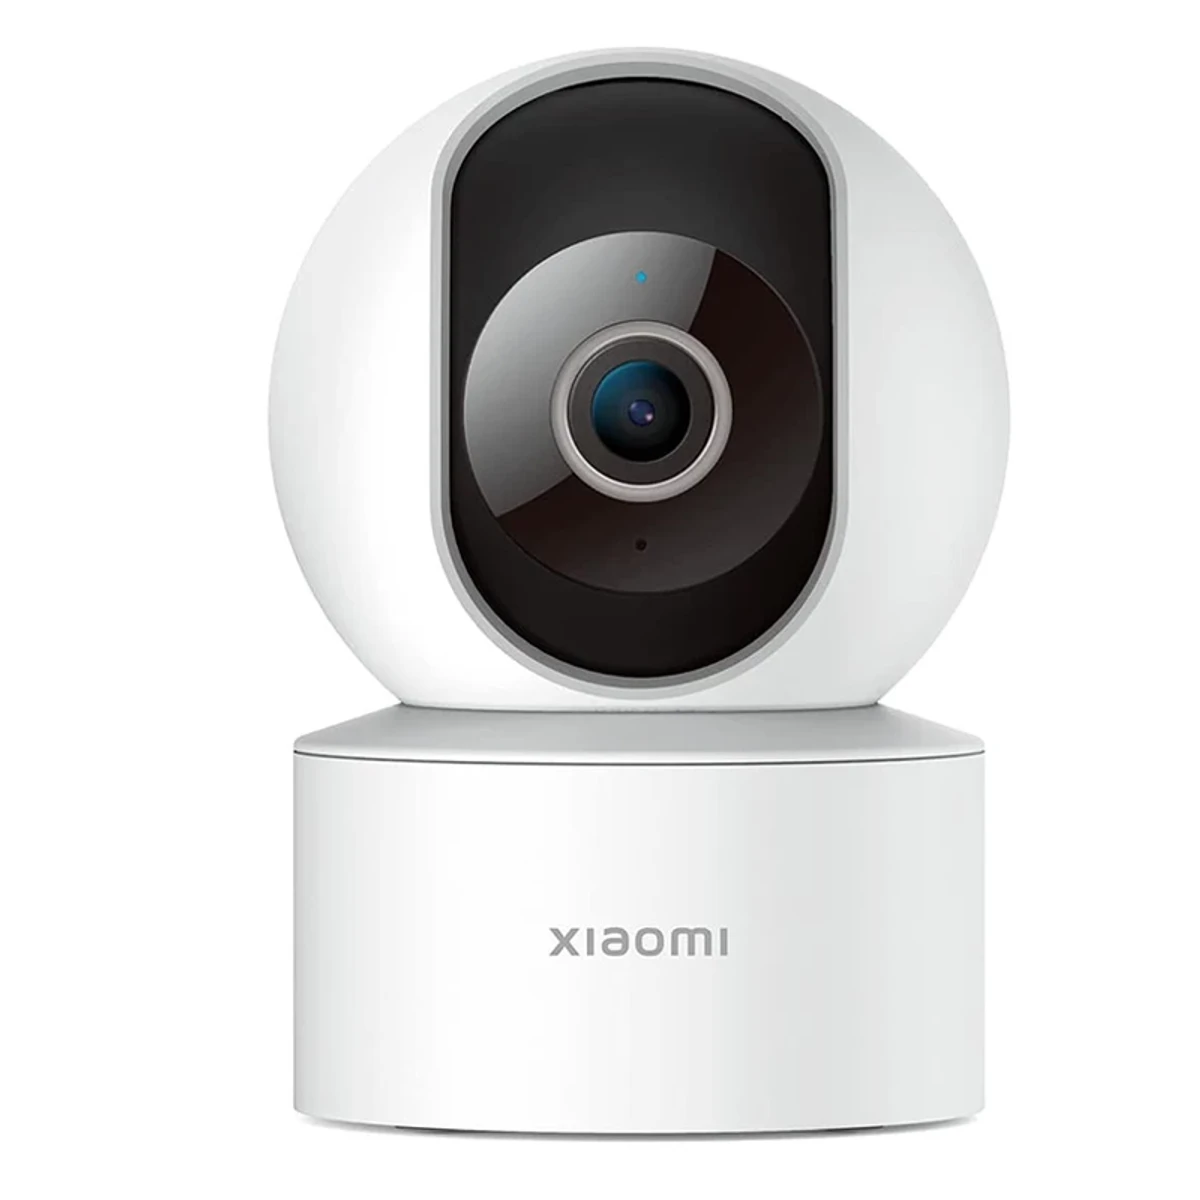 Xiaomi C200 360 Degree FHD (2.0MP) White Smart Home Security Wi-Fi Dome IP Camera MJSXJ14CM (without Adapter)